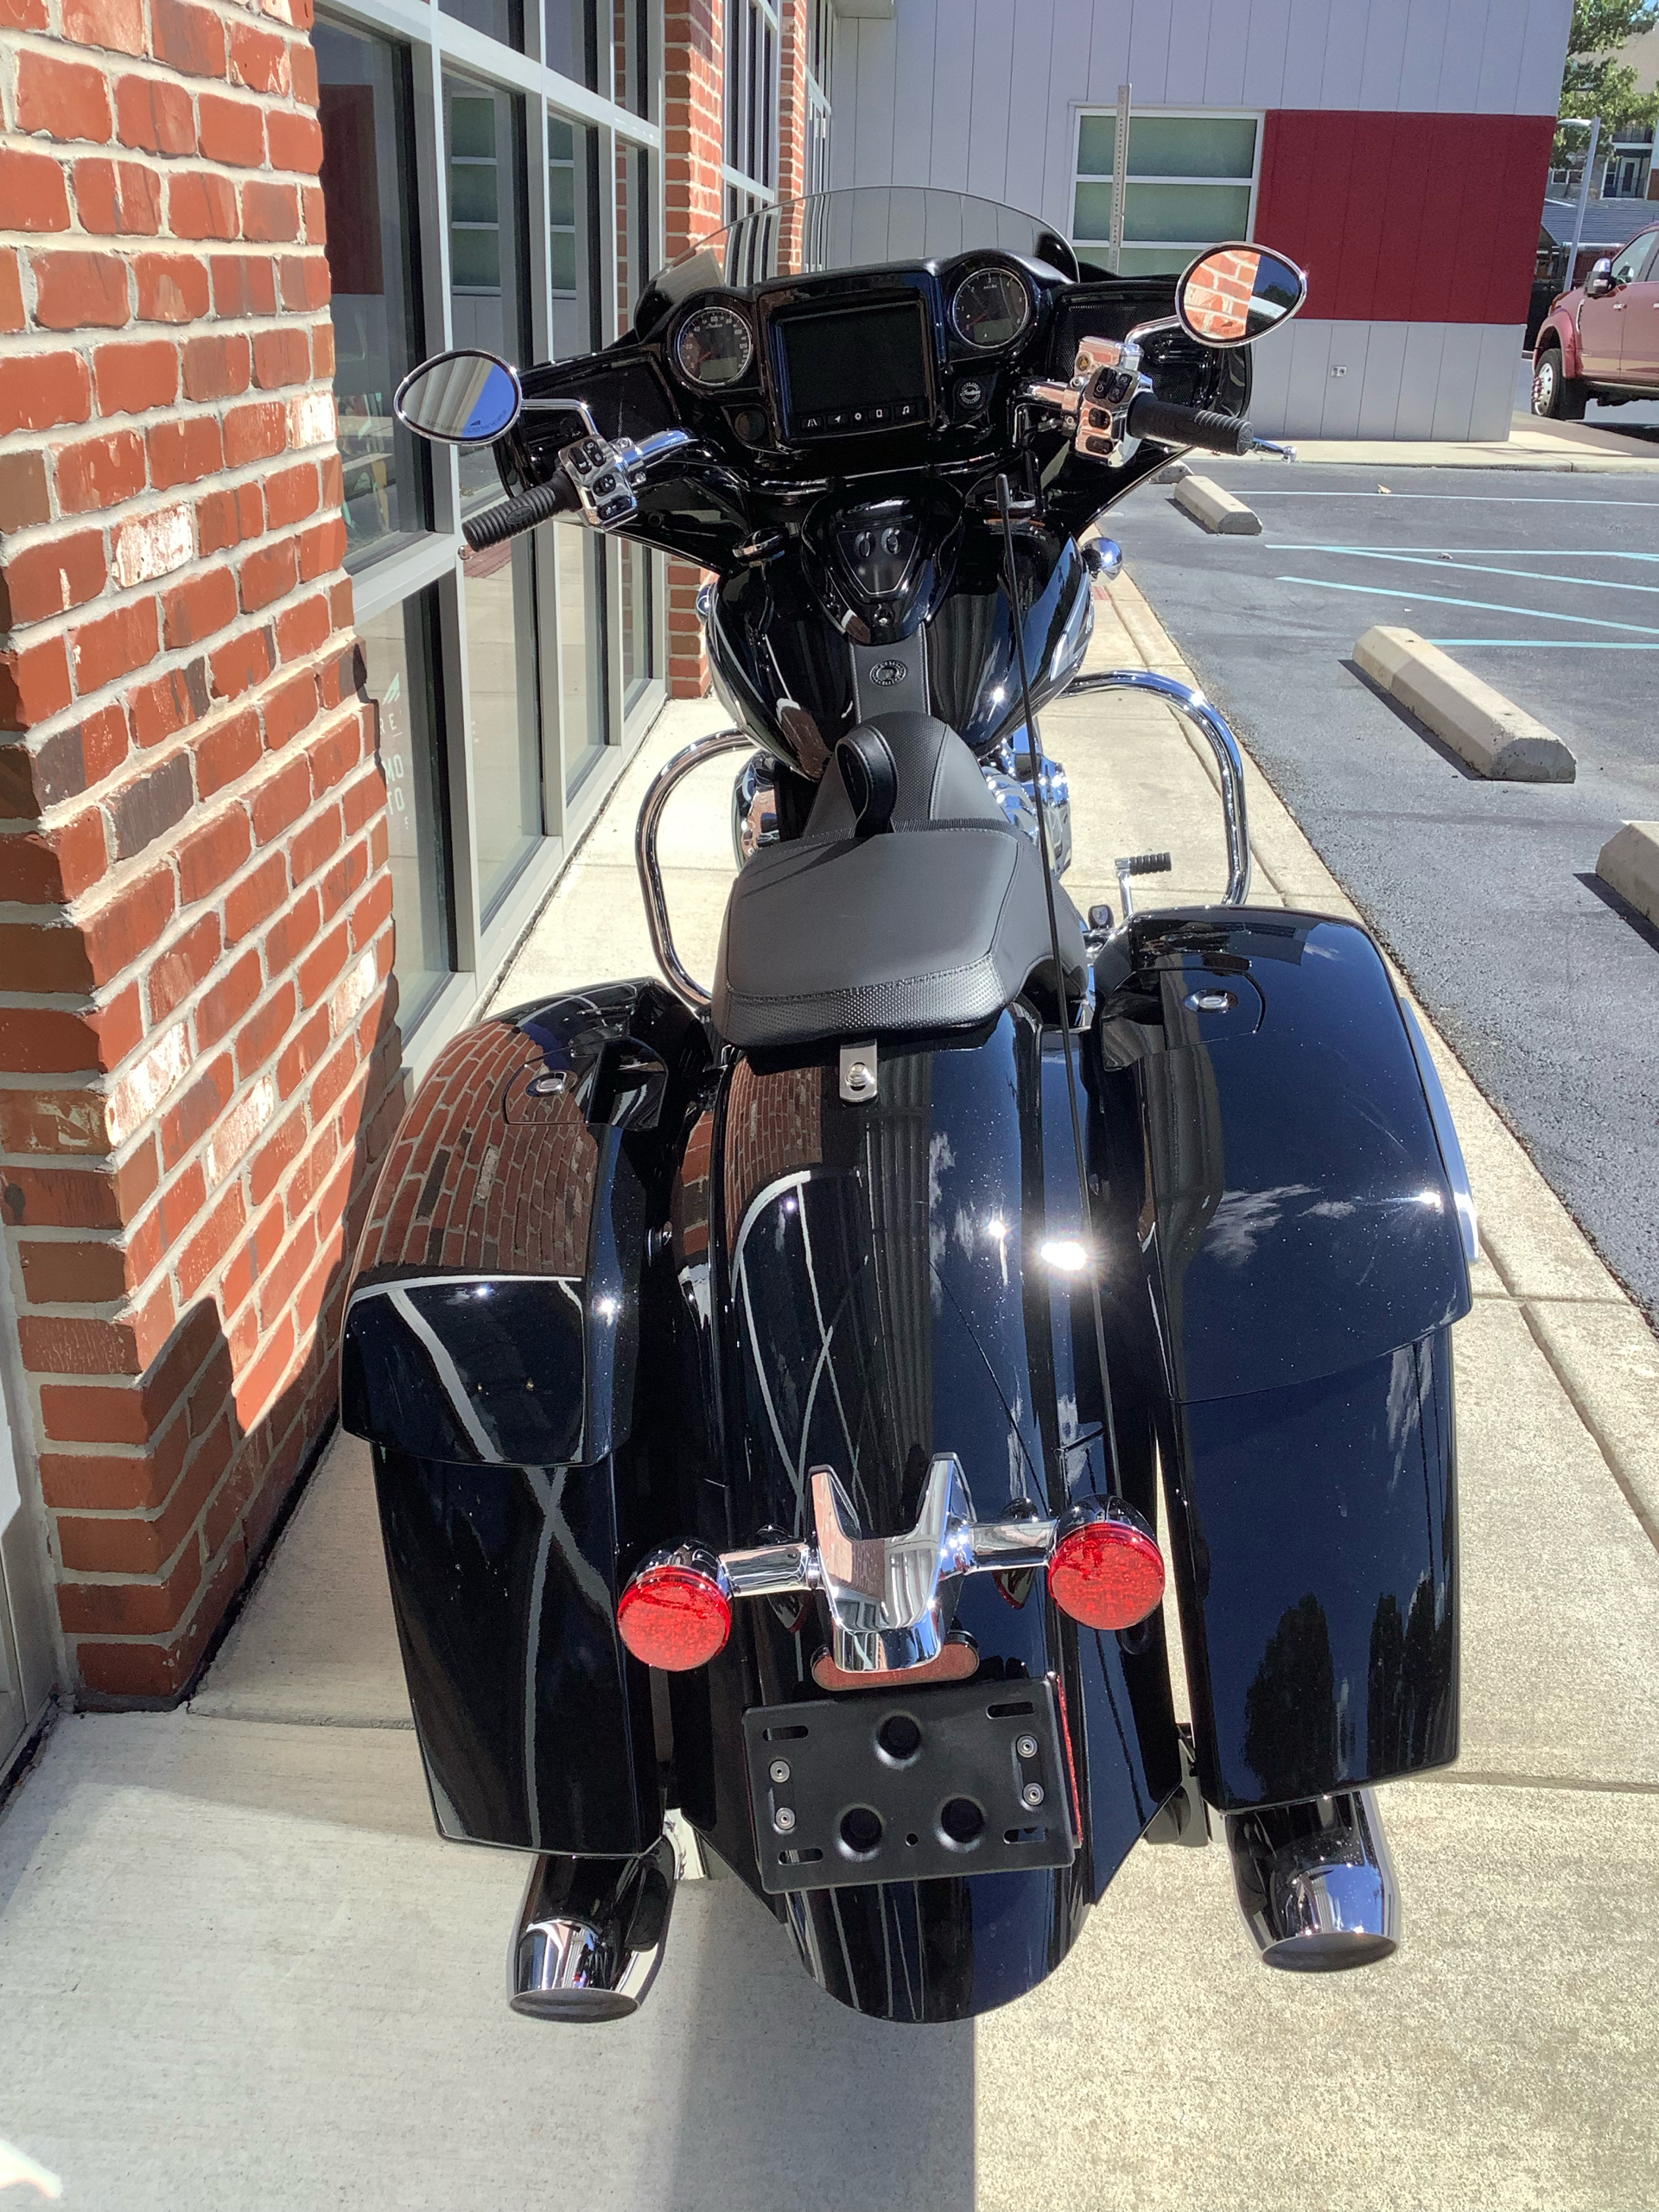 2022 Indian Chieftain® Limited in Newport News, Virginia - Photo 4